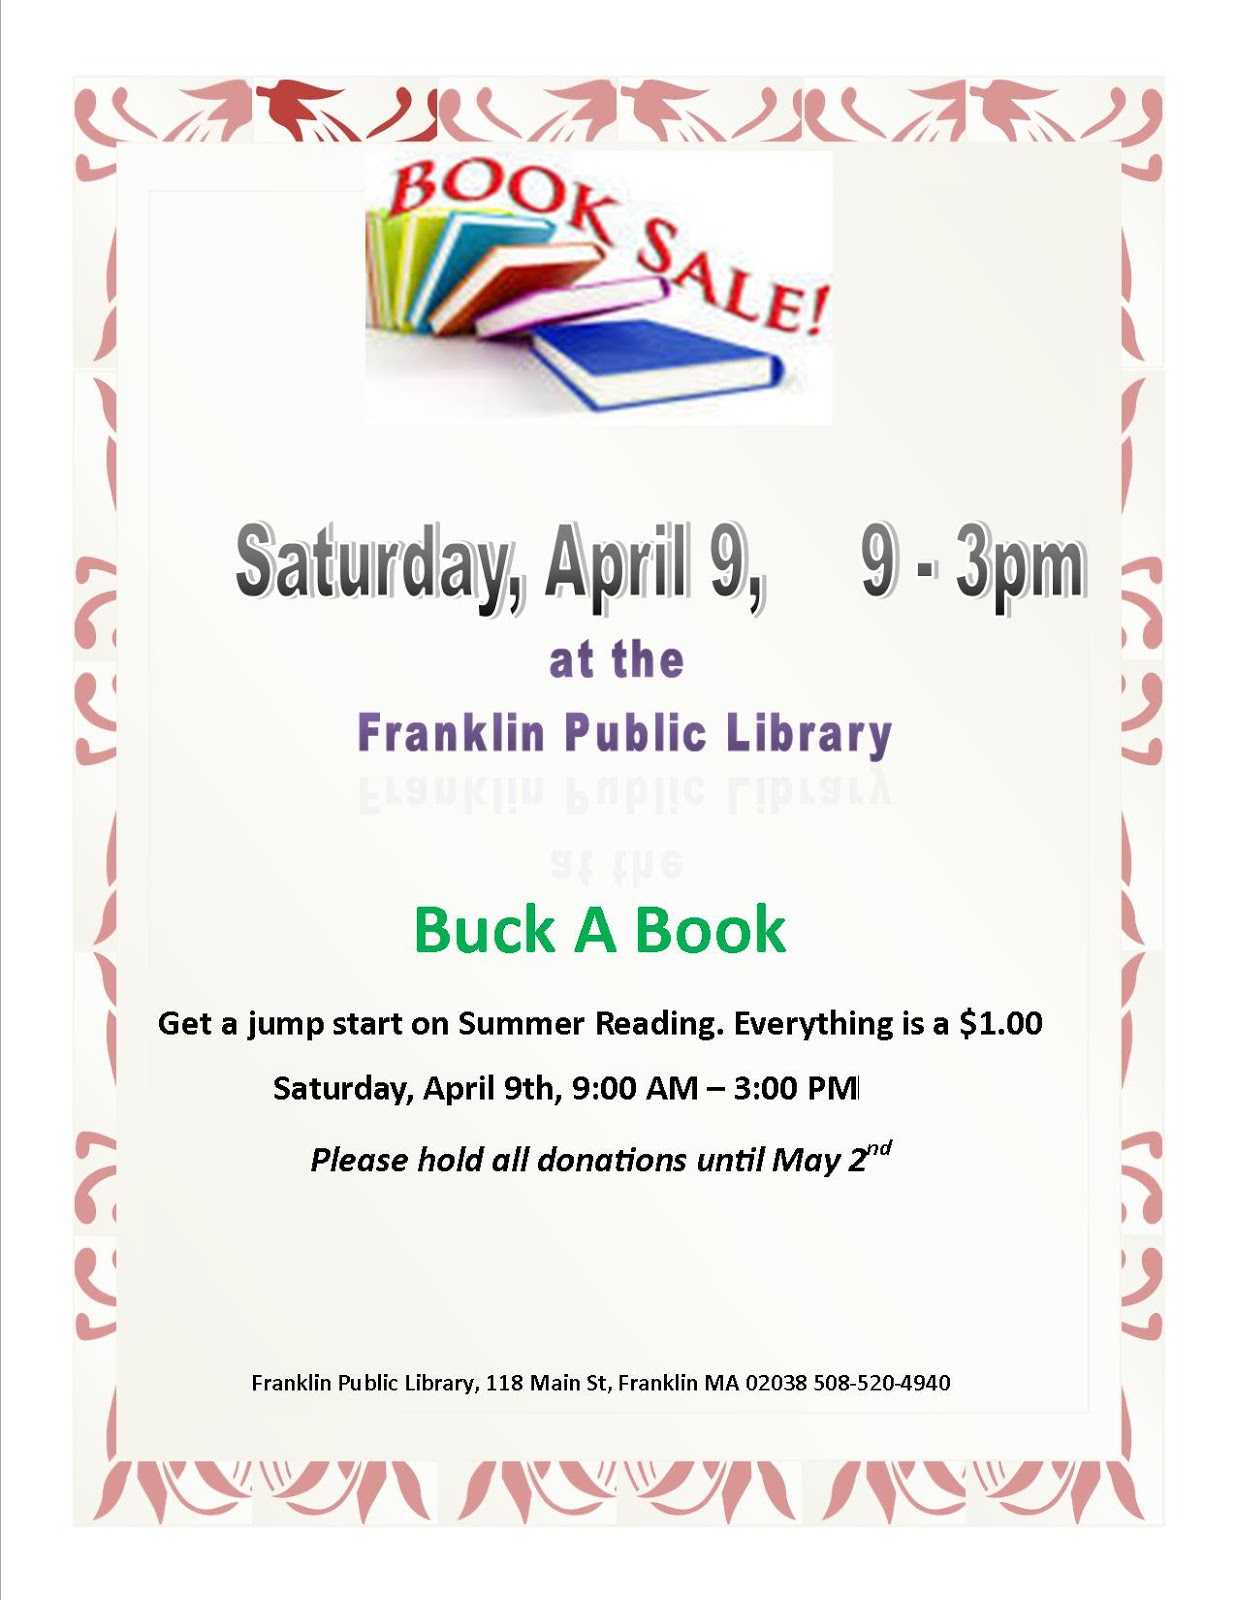 Franklin Matters: Buck a Book - Book Sale at the Library on Saturday!